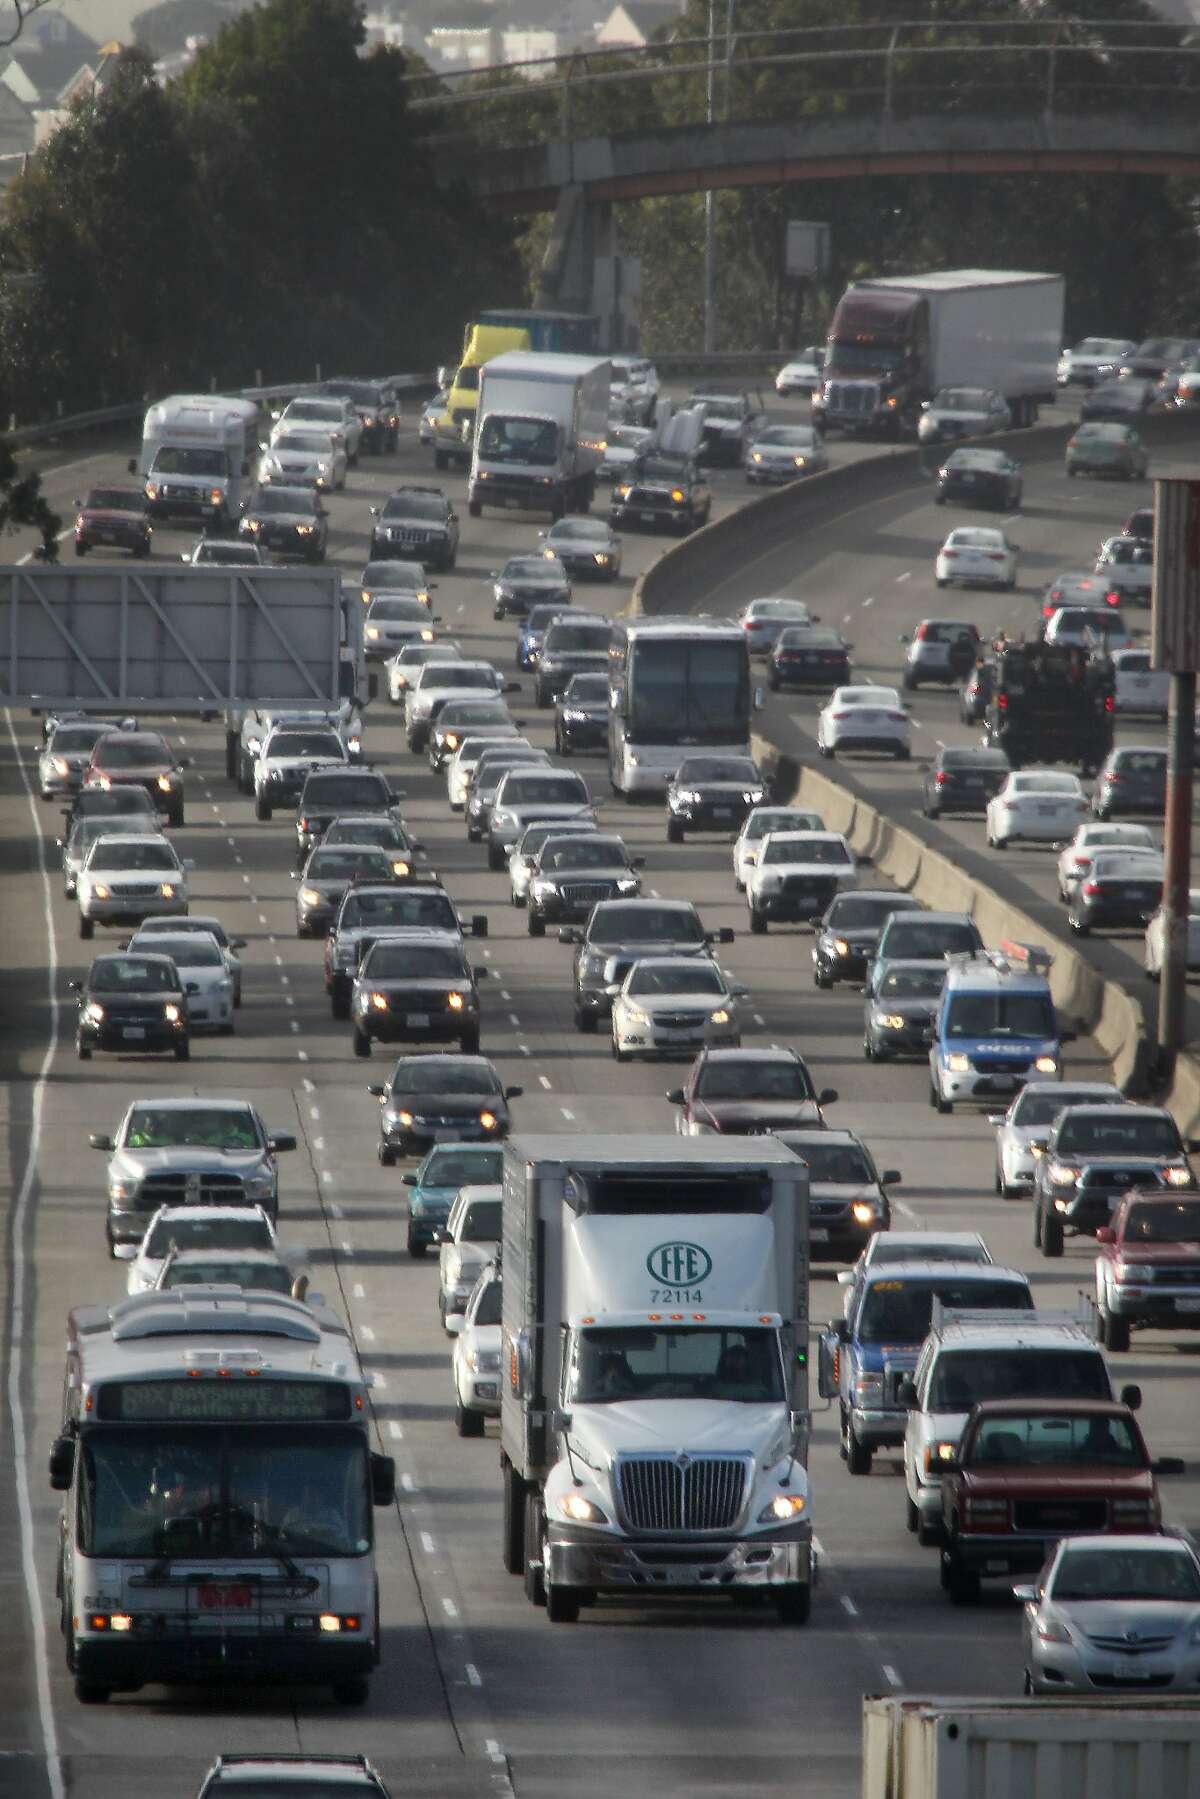 Vehicles move along in traffic on Highway 101 on Monday, February 9, 2014 in San Francisco, Calif.